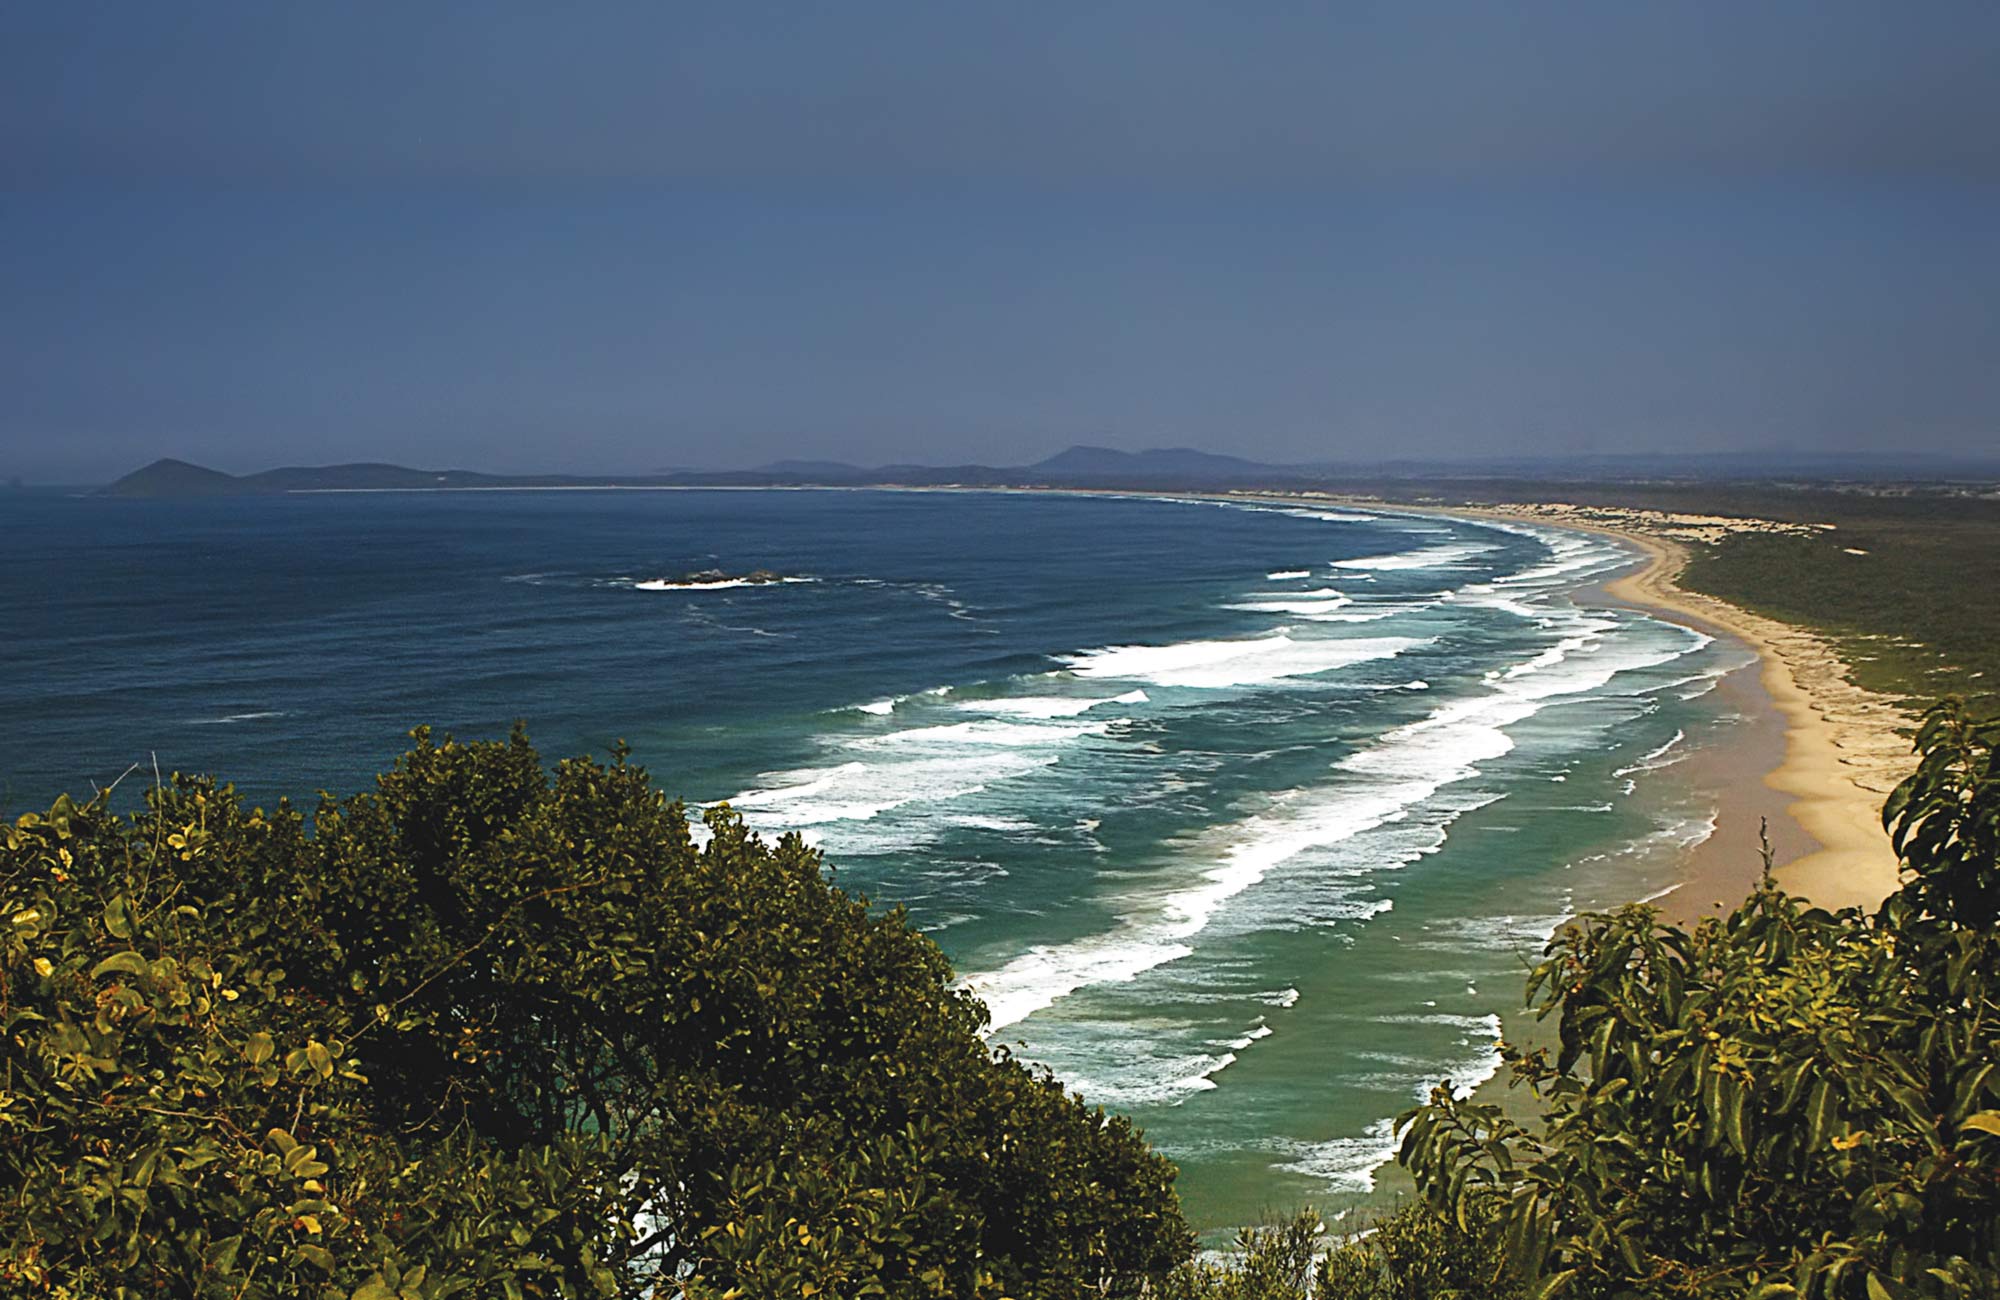 The view from the lighthouse along the coast. Photo:Barry Collier